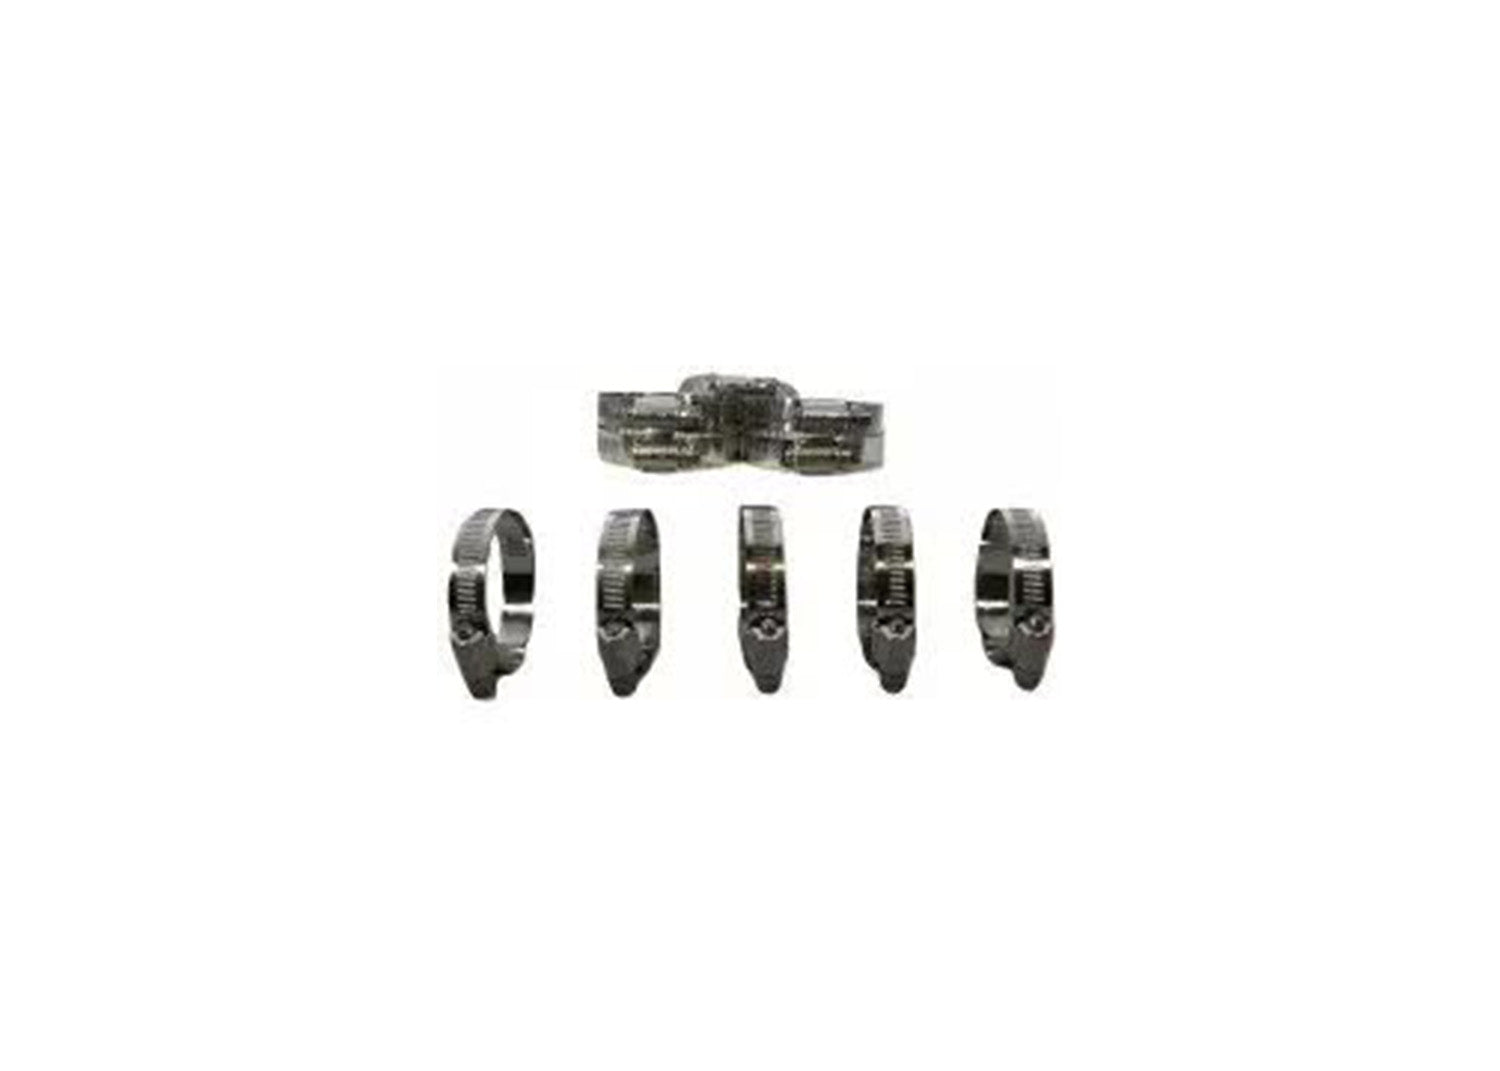 Worm Gear Clamps 0.44"-0.90" Clamping Range Part Number-222002